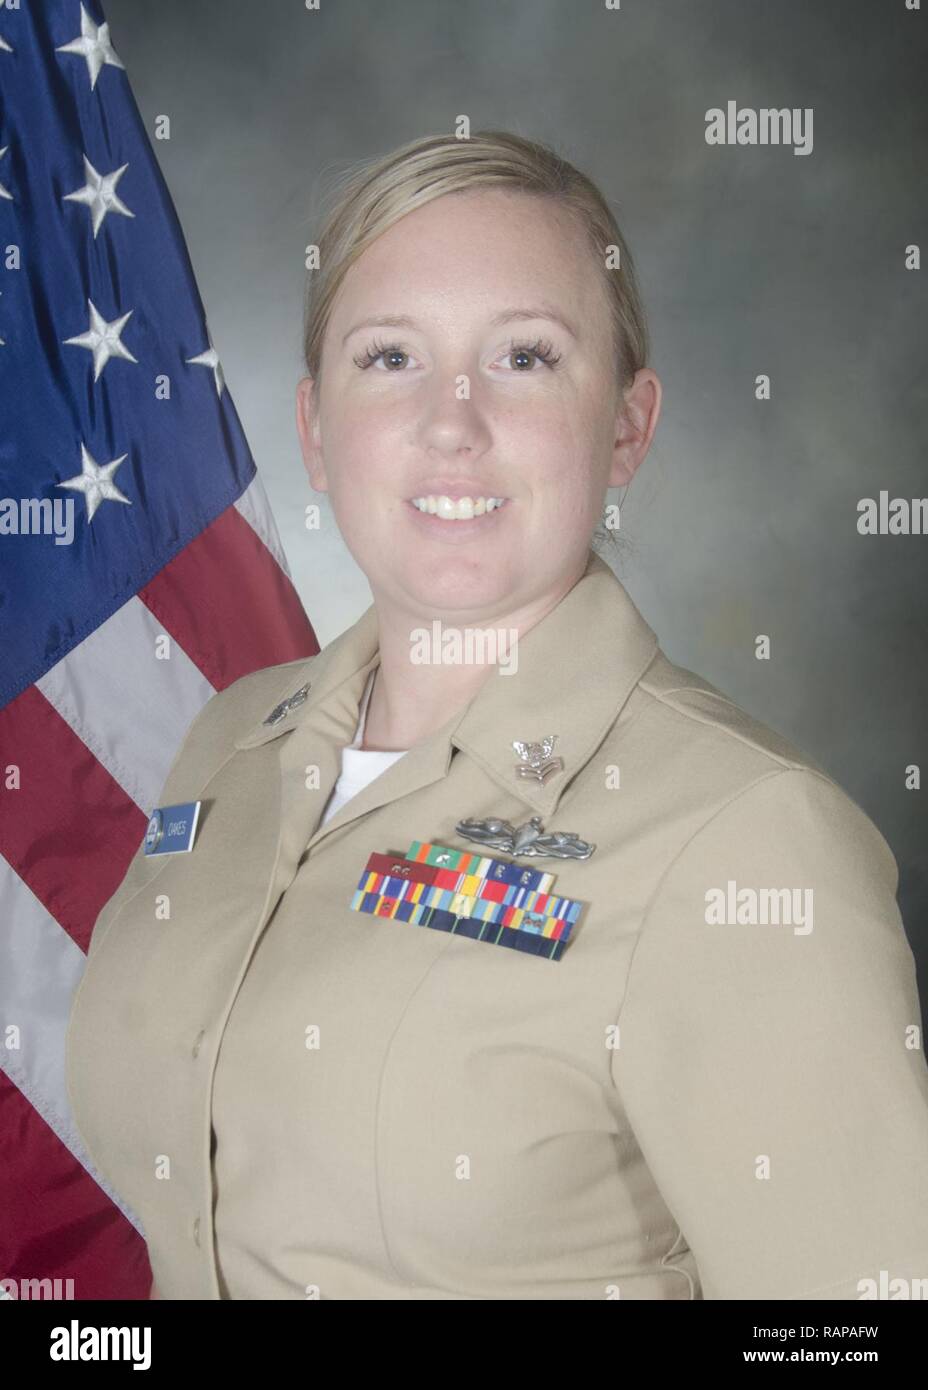 Hospital Corpsman 1st Class Elisabeth Oakes, native of Belgrade, Mont., was announced as the 2016 Senior Sailor of the Year for the submarine tender USS Frank Cable (AS 40). Frank Cable is forward deployed to the island of Guam and conducts maintenance and support of submarines and surface vessels deployed to the U.S. 5th and 7th Fleet area of operations. Stock Photo